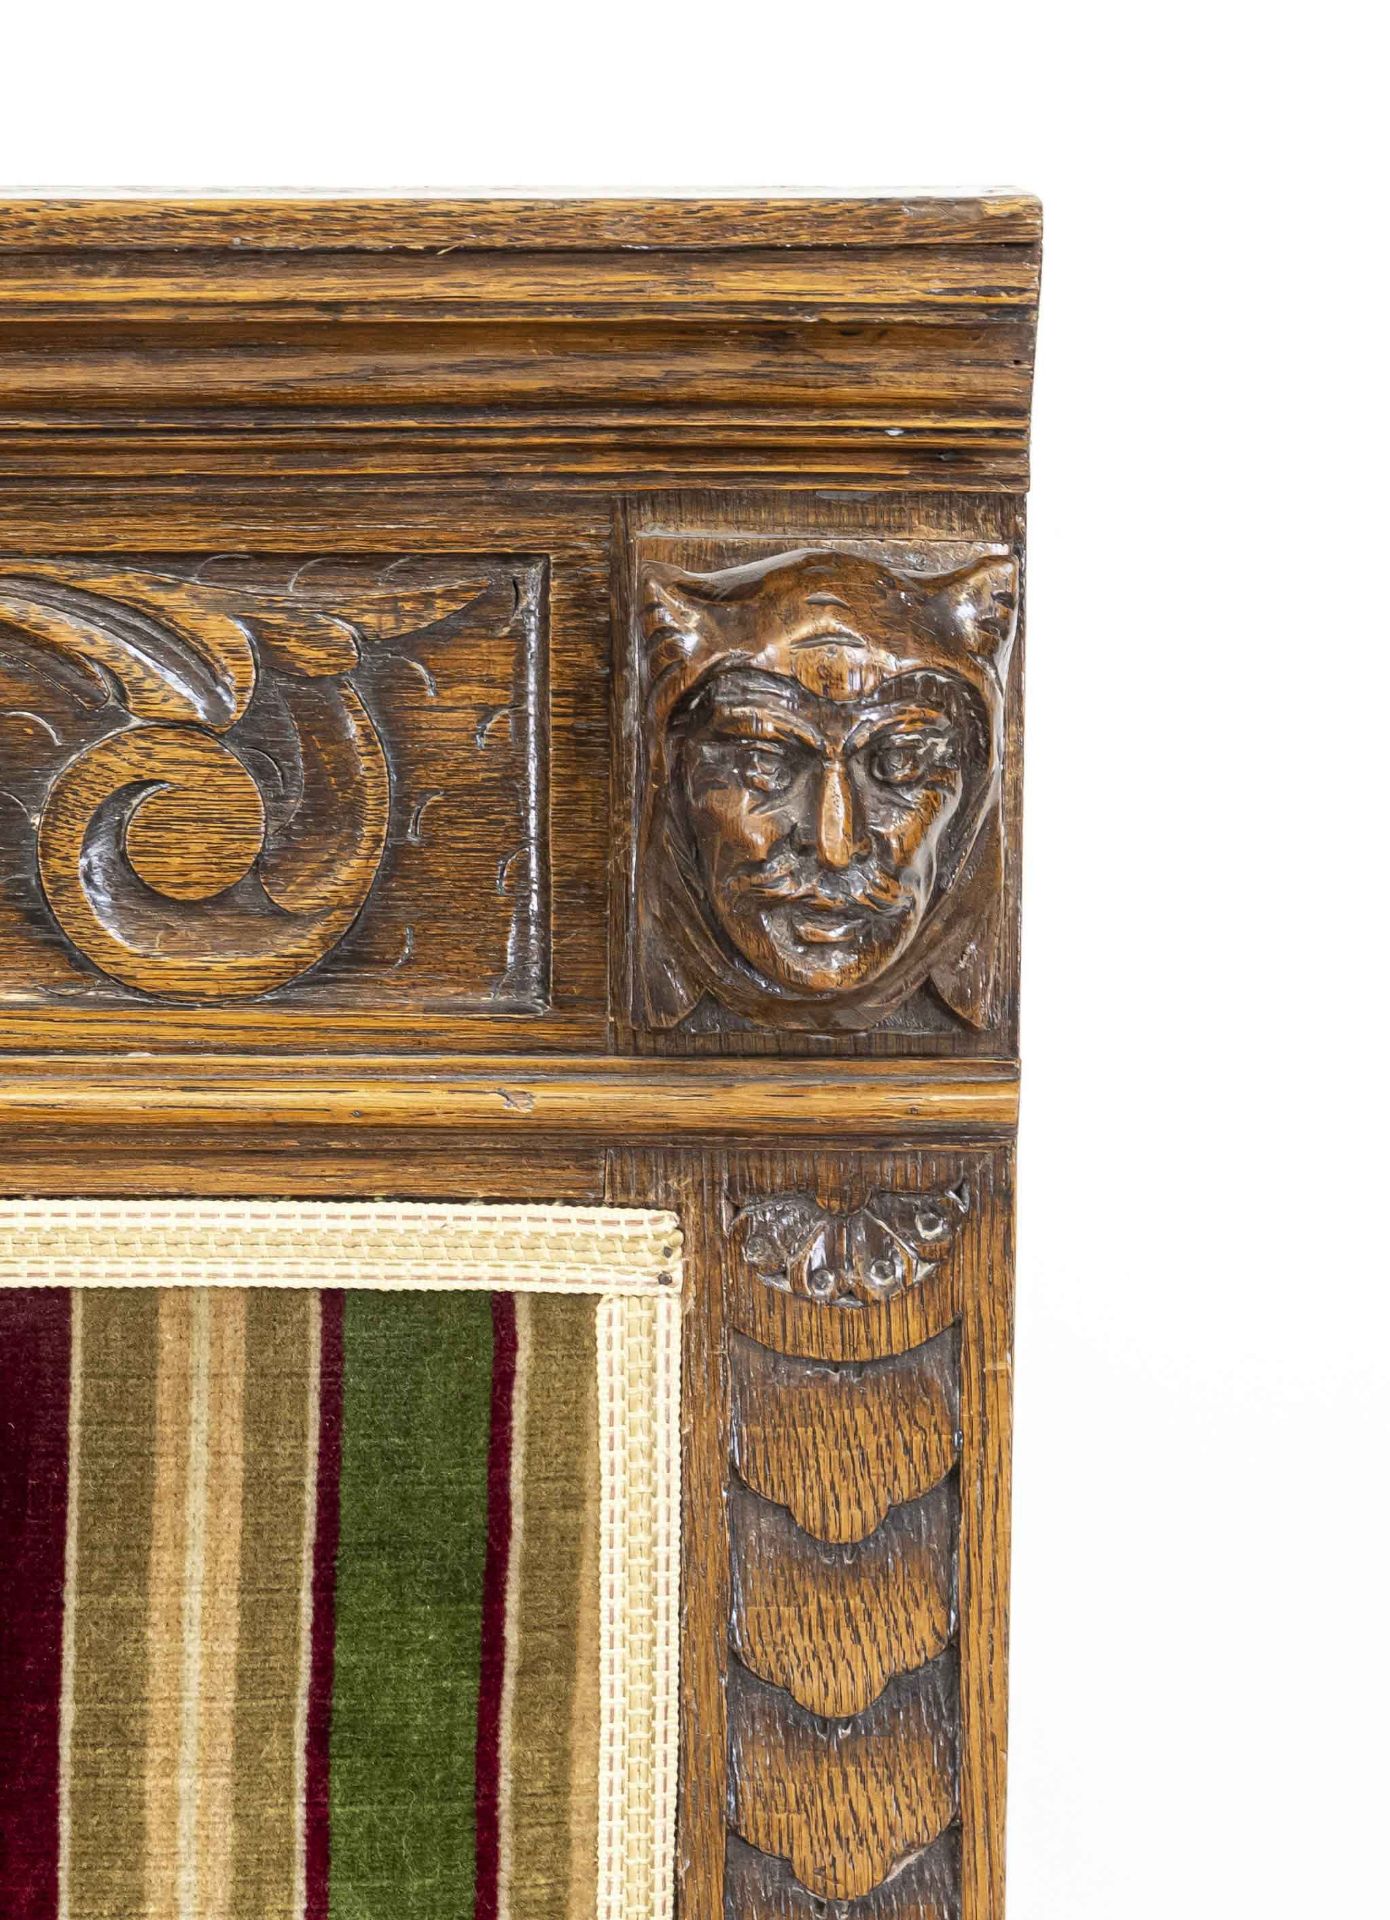 Bench circa 1880, oak with carved decoration typical of the period, 135 x 133 x 67 cm. - Image 2 of 2